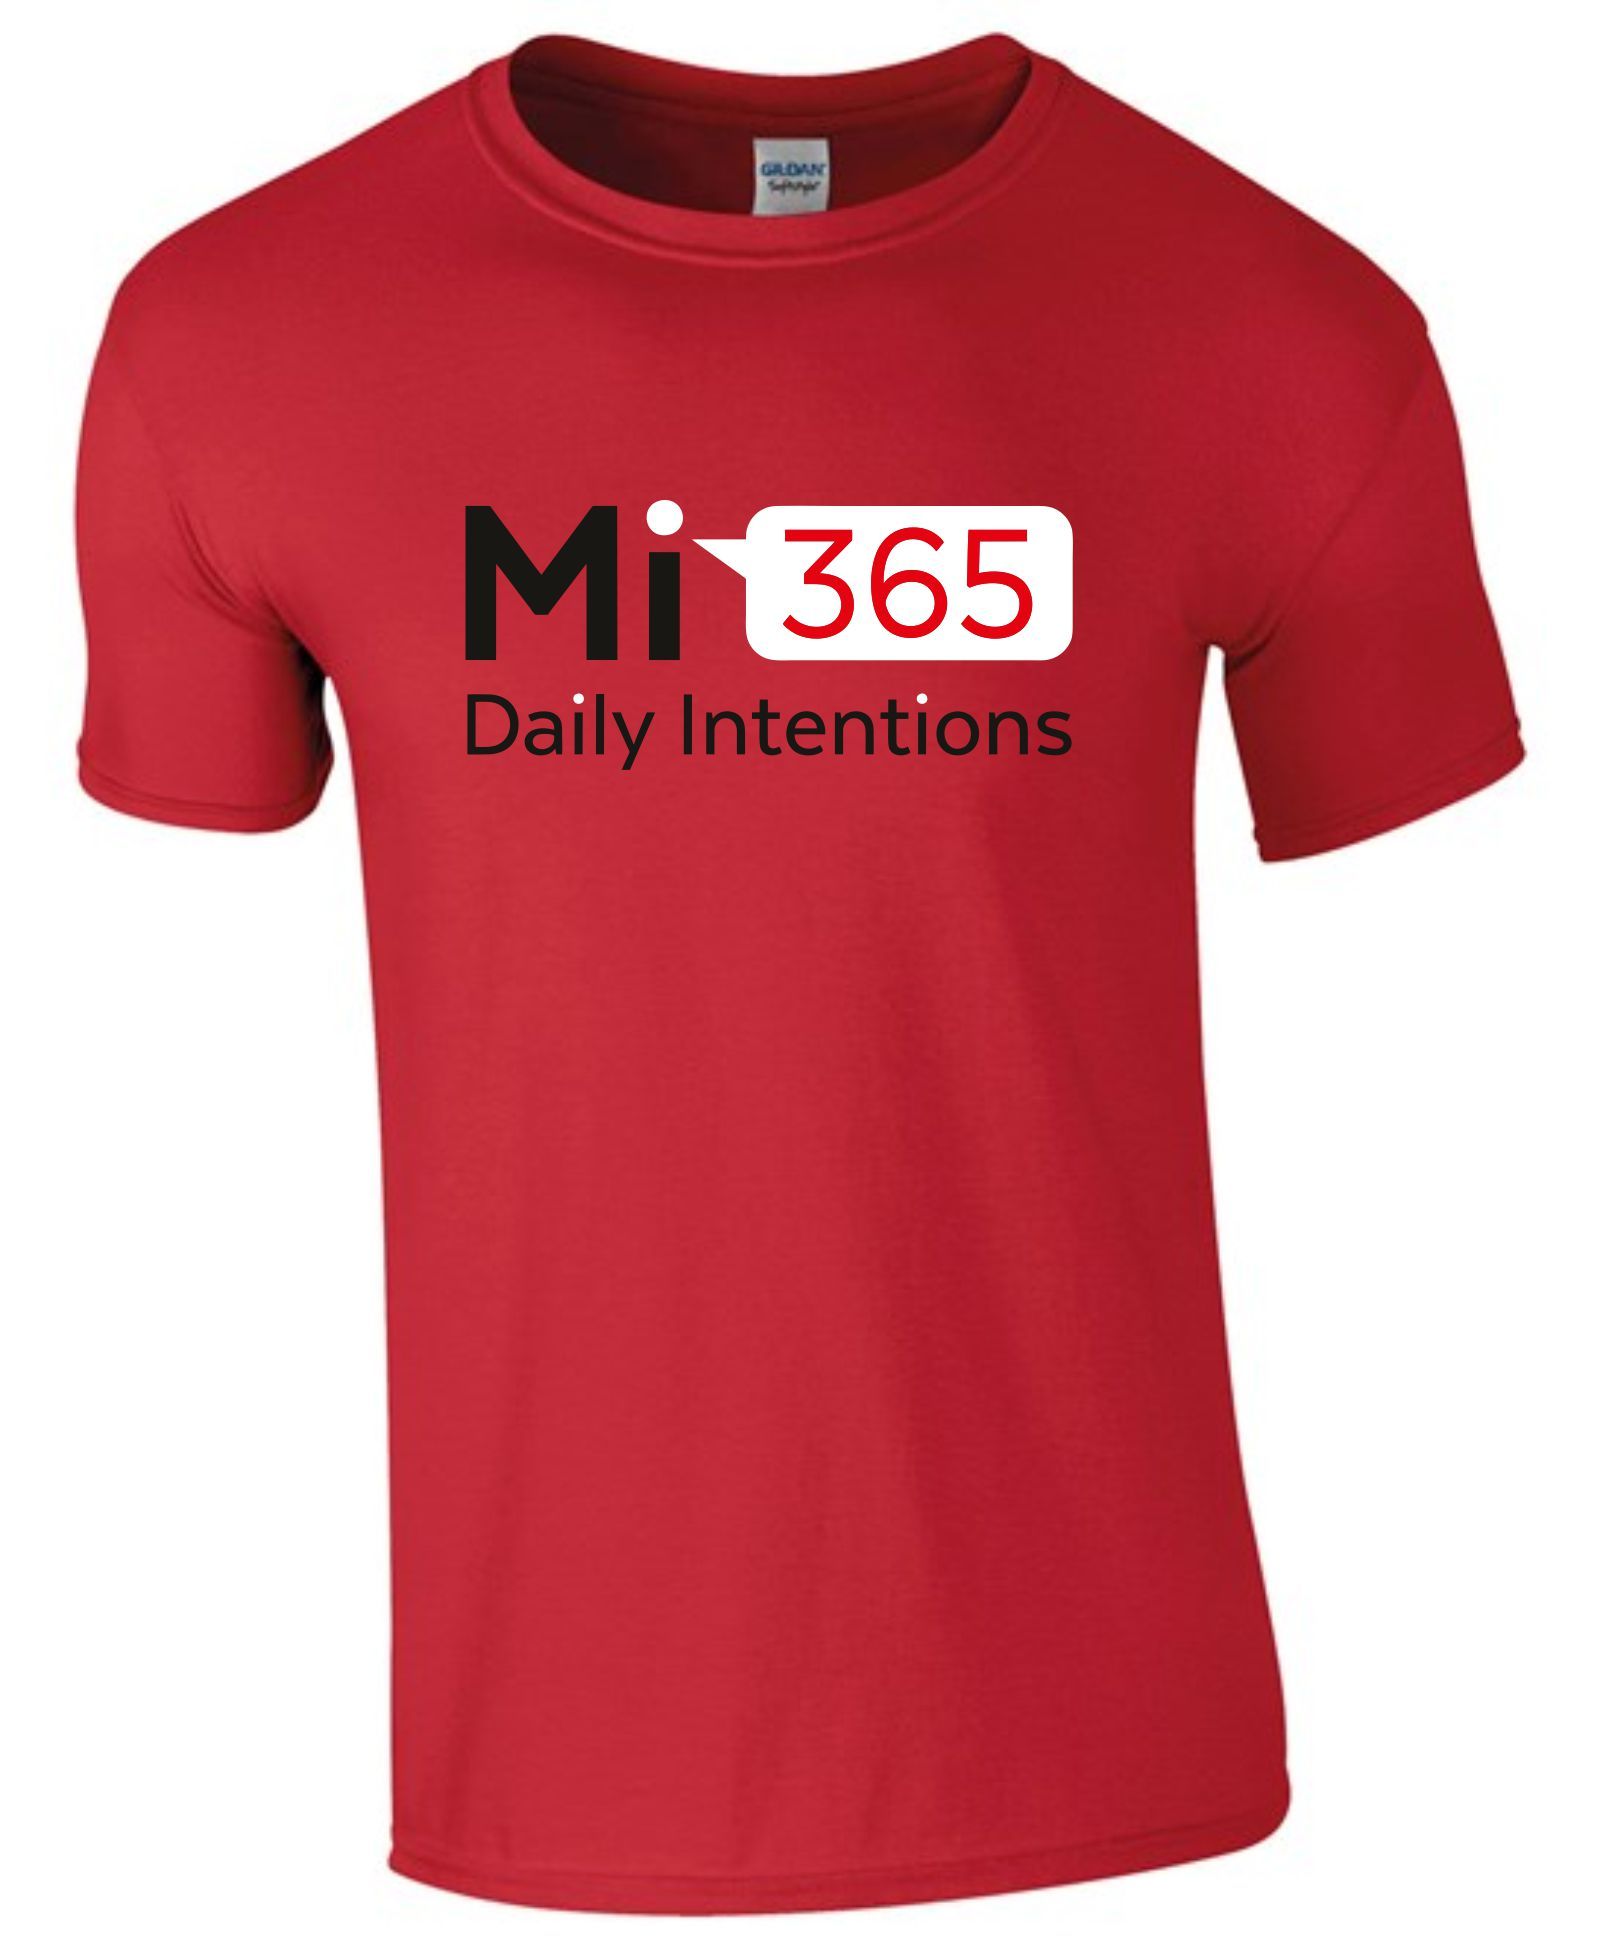 Mi365 Daily Intentions - T-Shirt